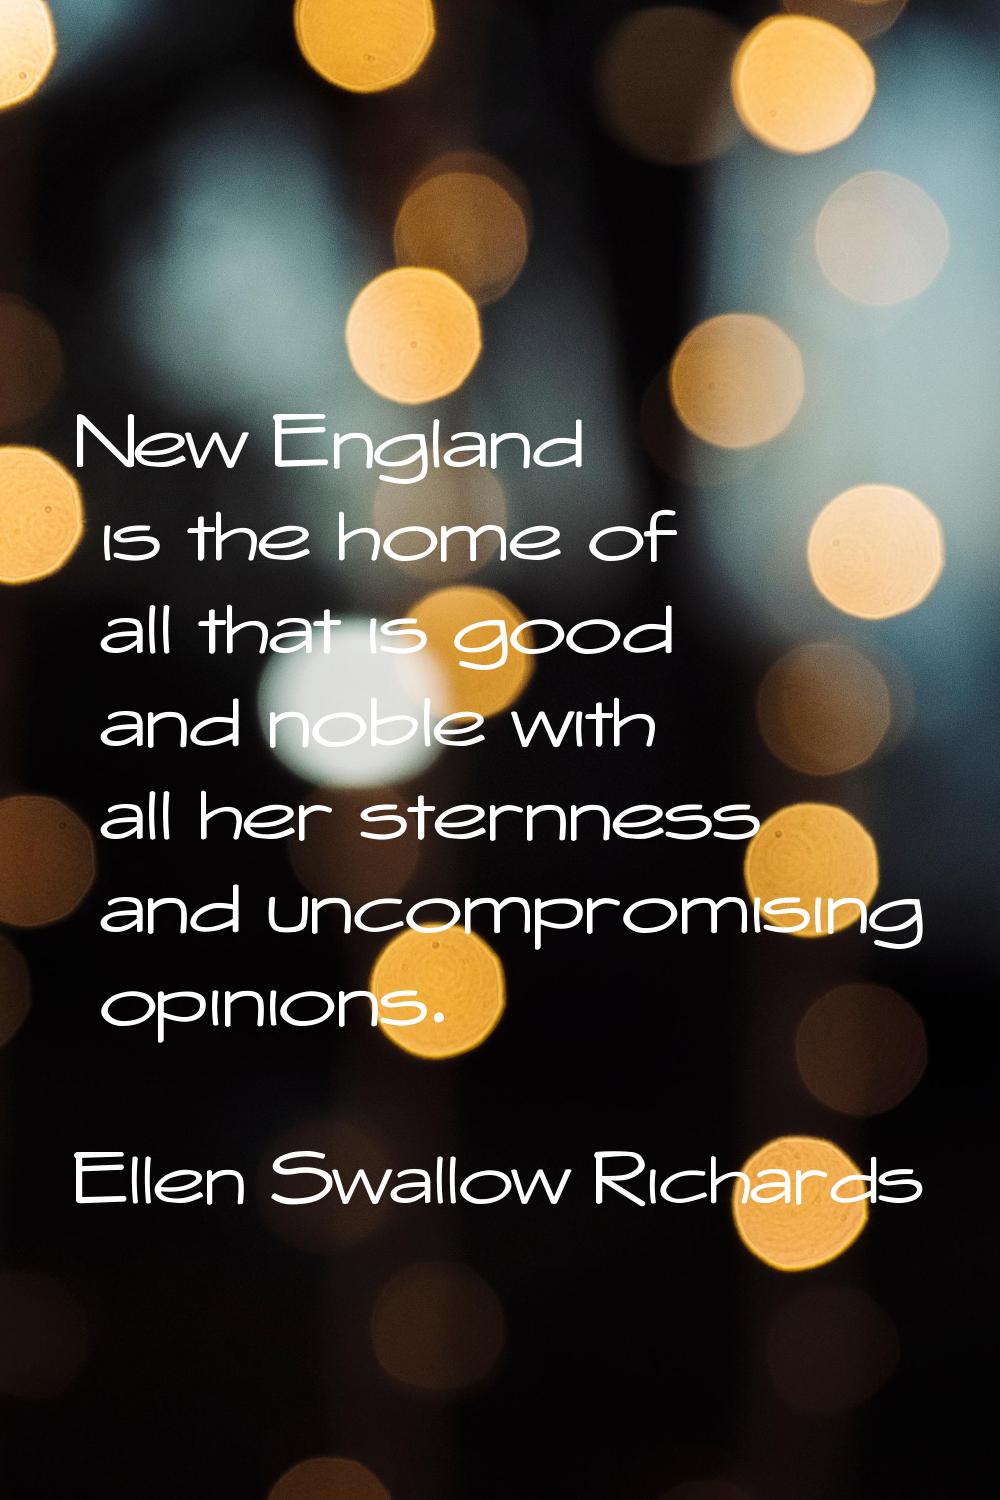 New England is the home of all that is good and noble with all her sternness and uncompromising opi